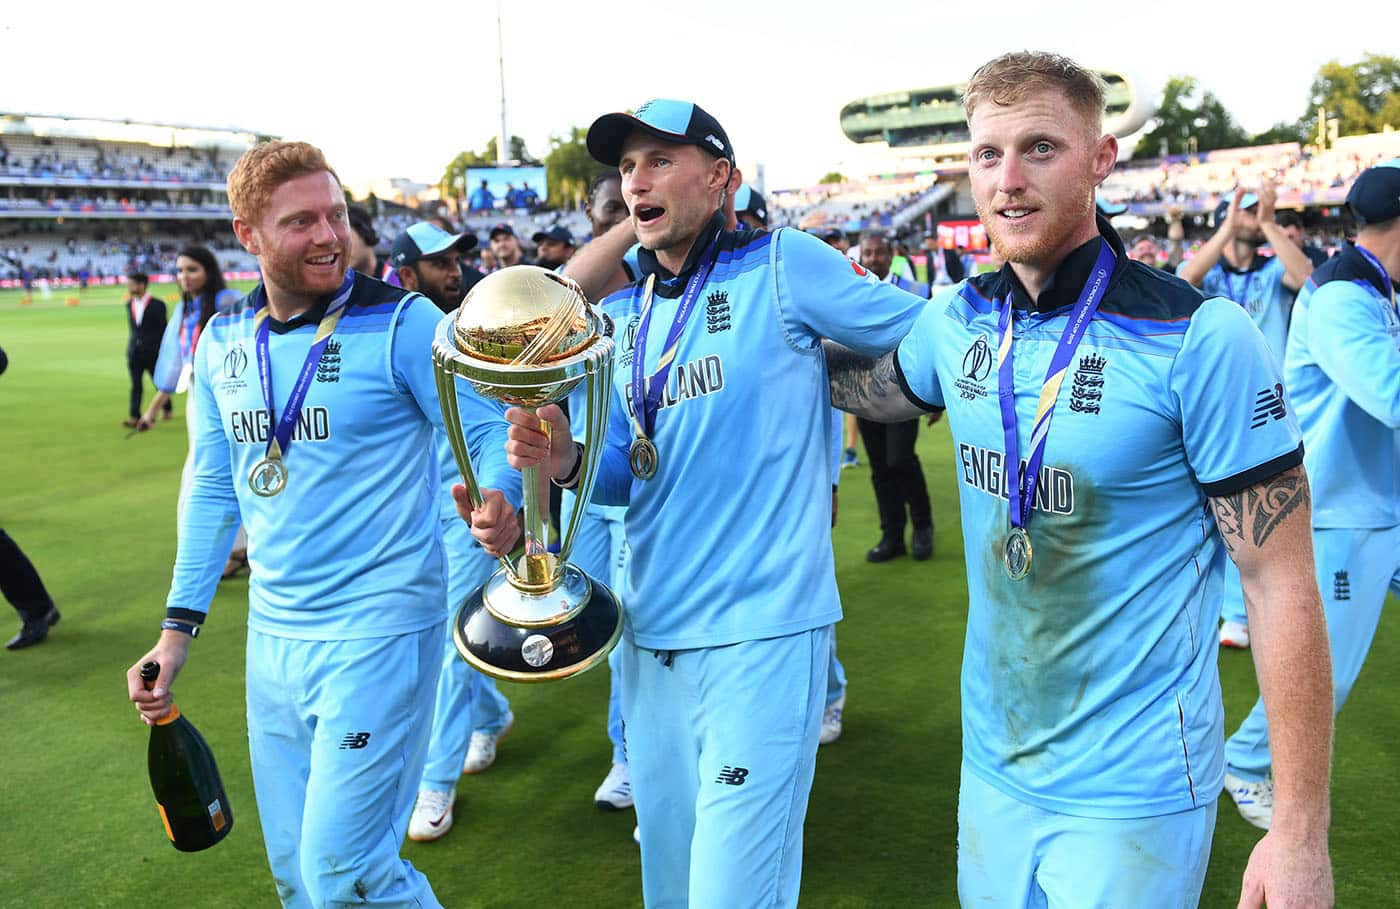 'We Had No Right To Win It': Joe Root on 2019 World Cup Final